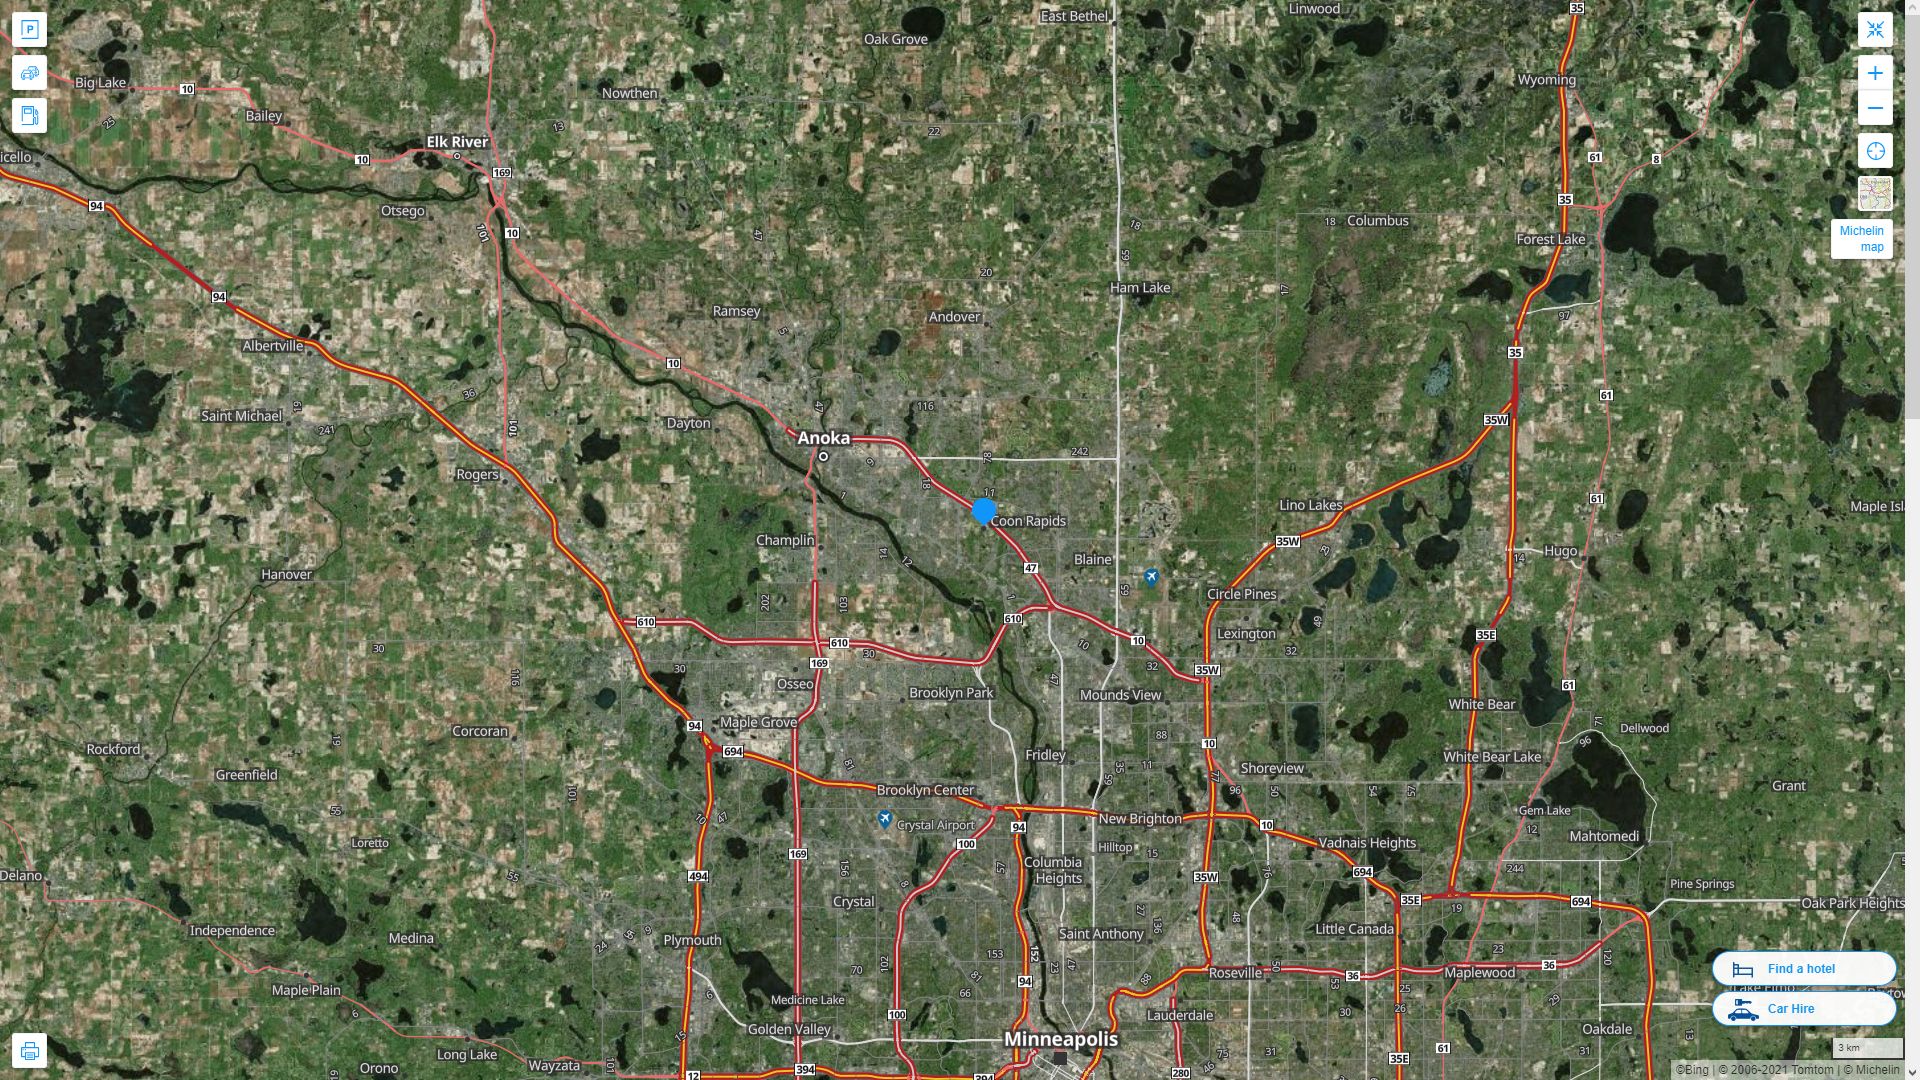 Coon Rapids Minnesota Highway and Road Map with Satellite View